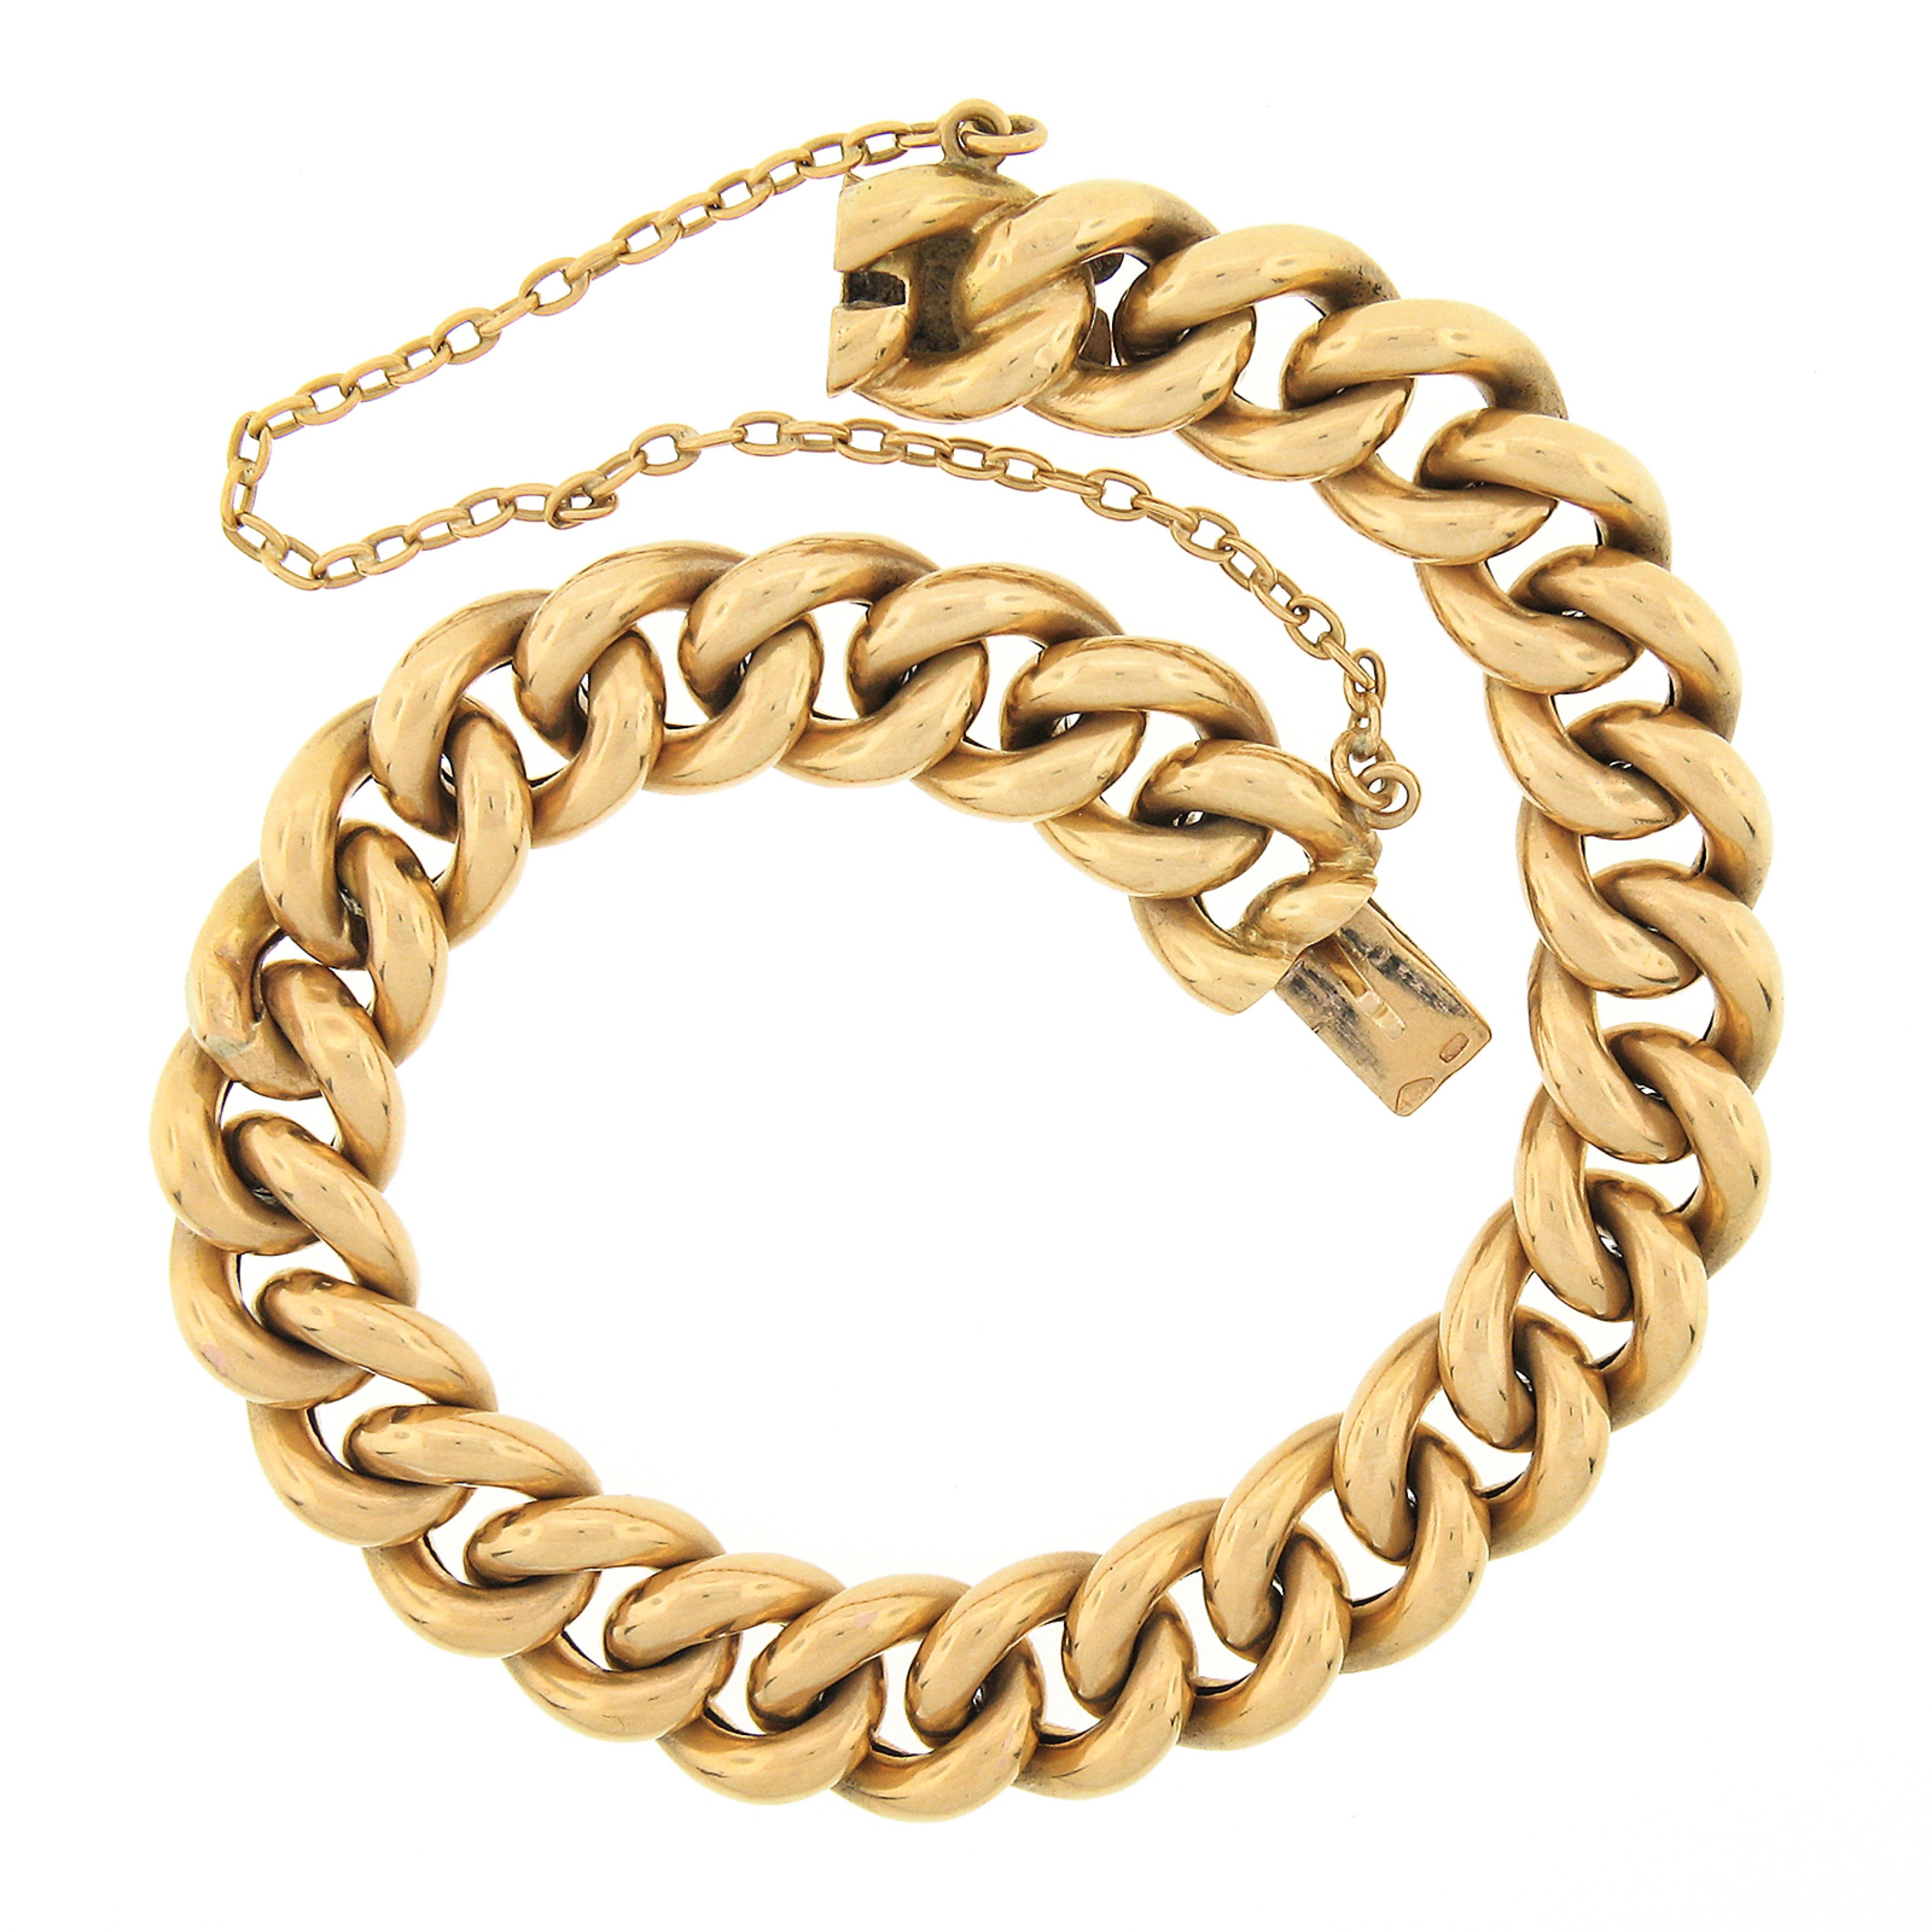 Women's or Men's Antique Victorian 18k Rosy Yellow Gold Puffed Curb Link Chain Bracelet